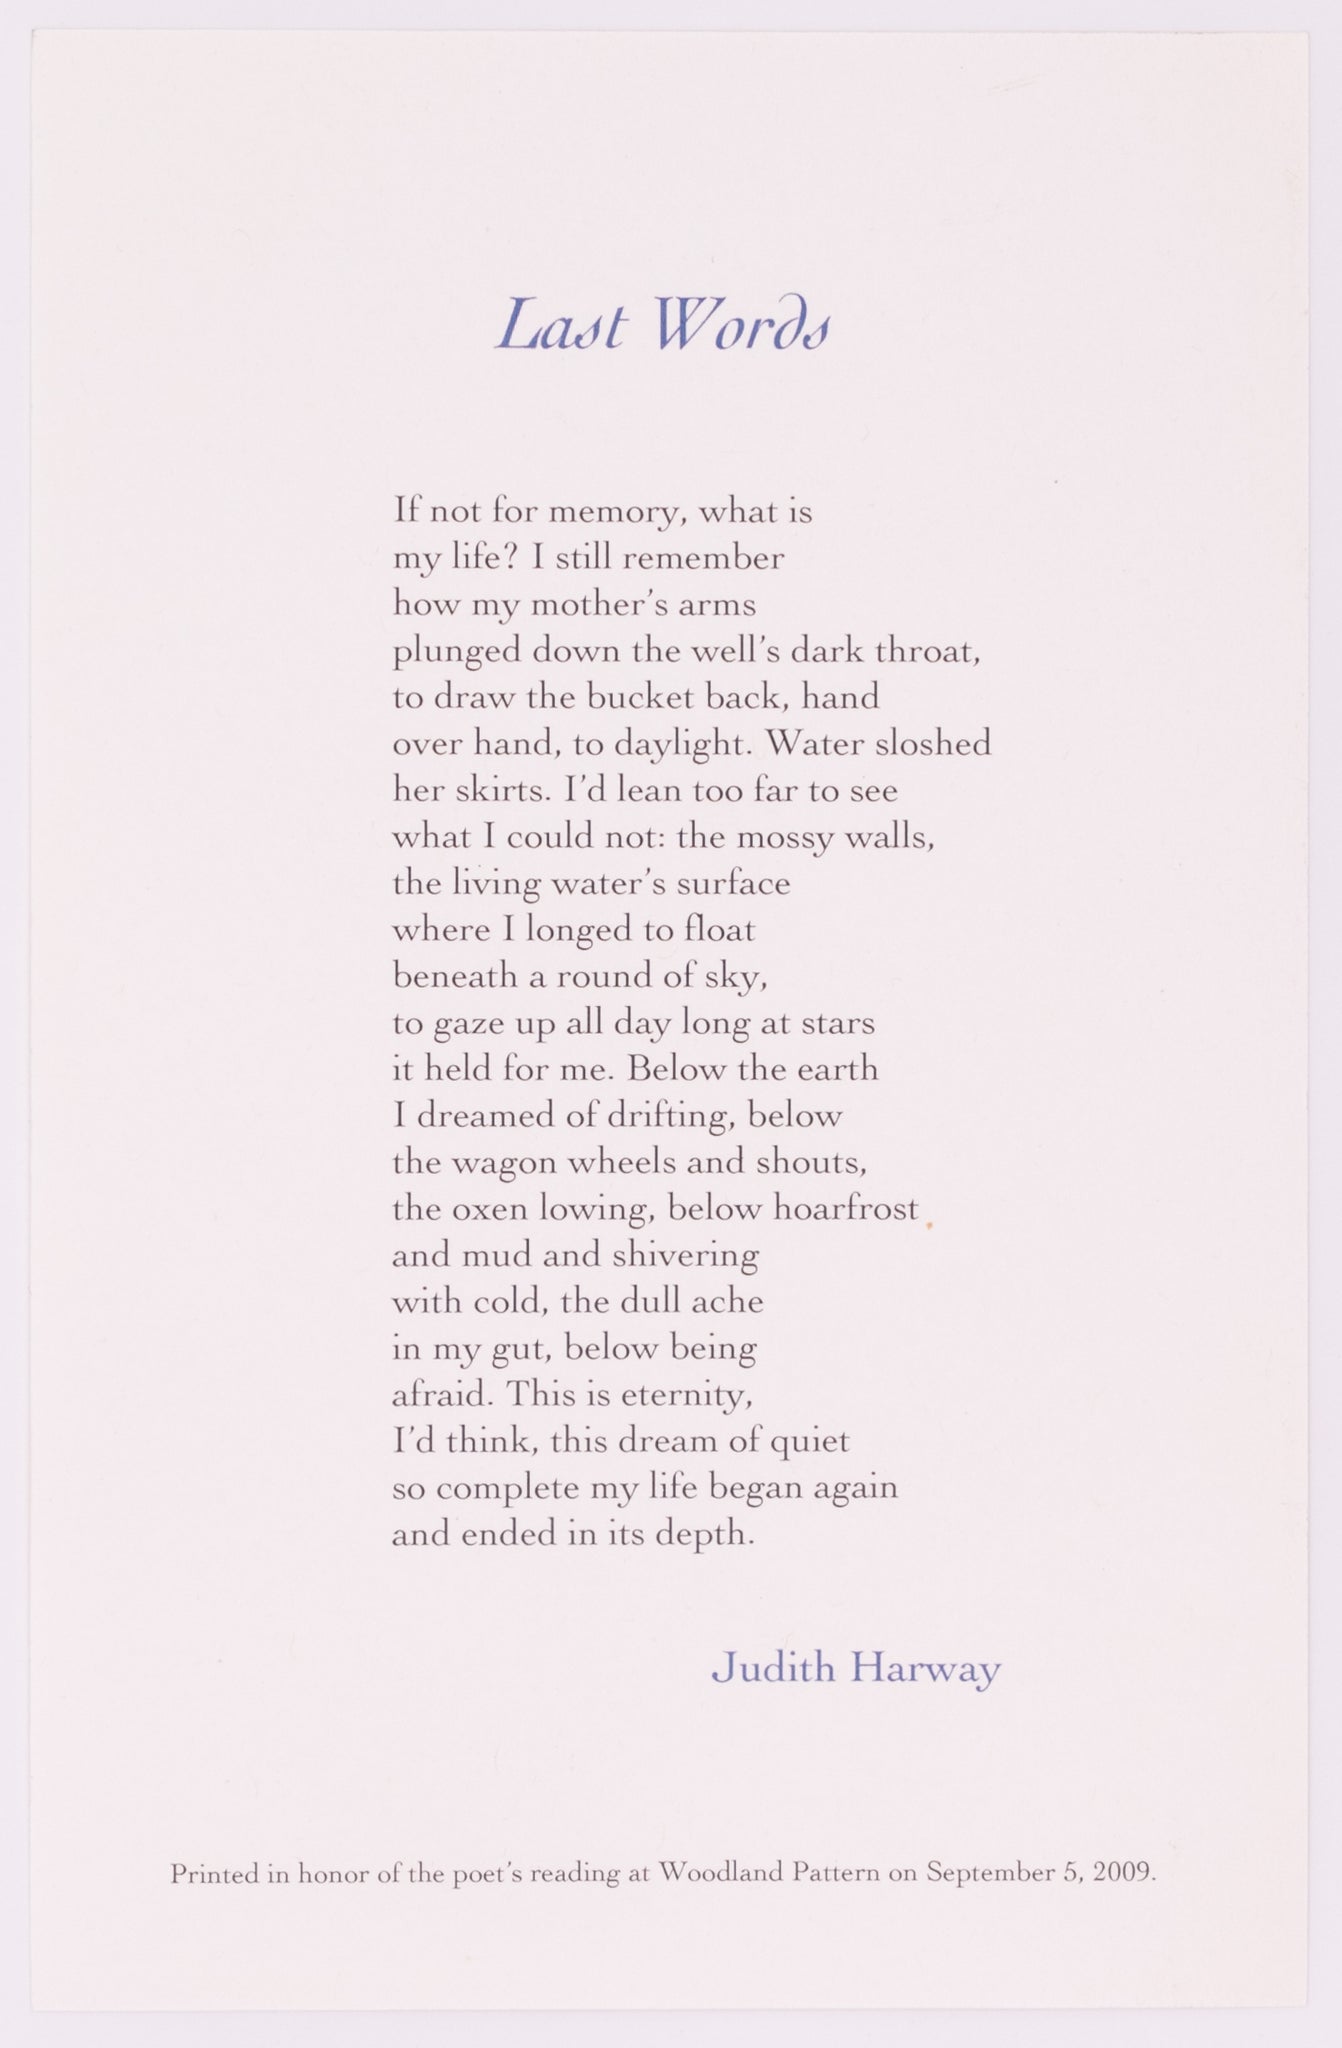 Broadside titled Last Words by Judith Harway. Blue and black text on grey paper.